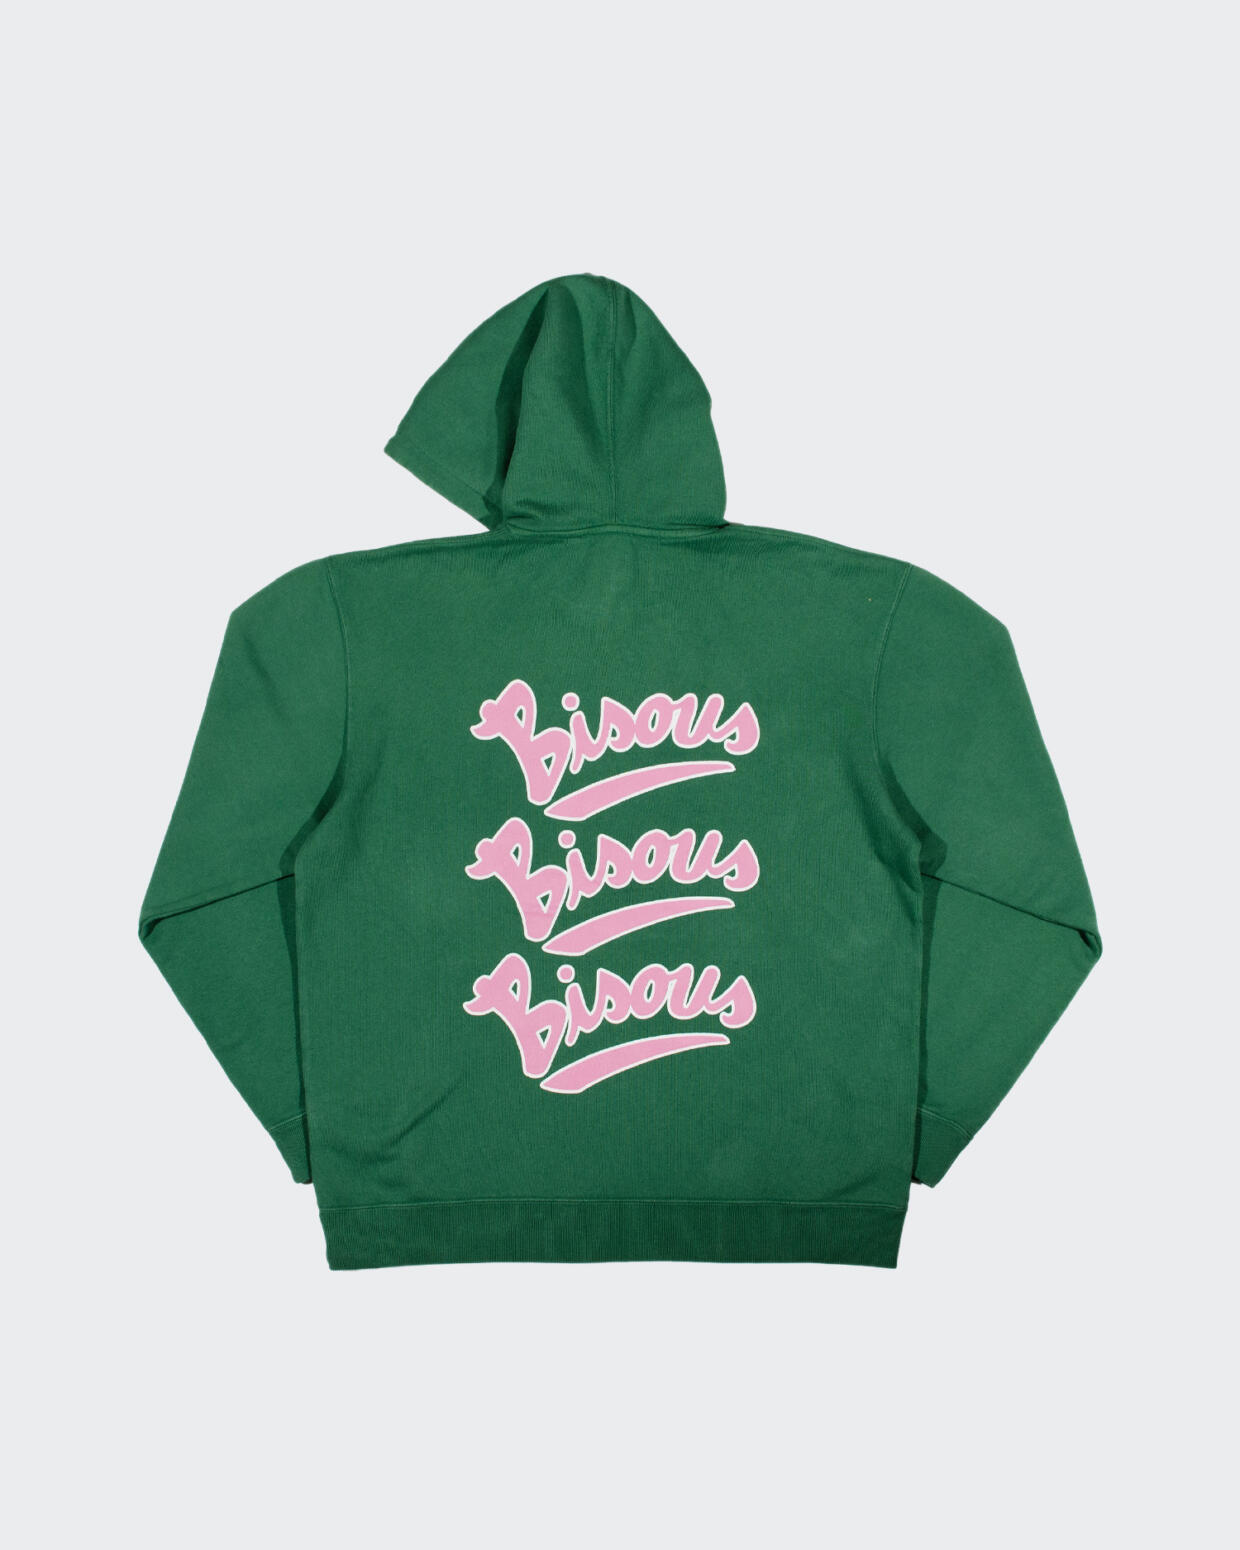 Bisous Bisous Gianni Hoody